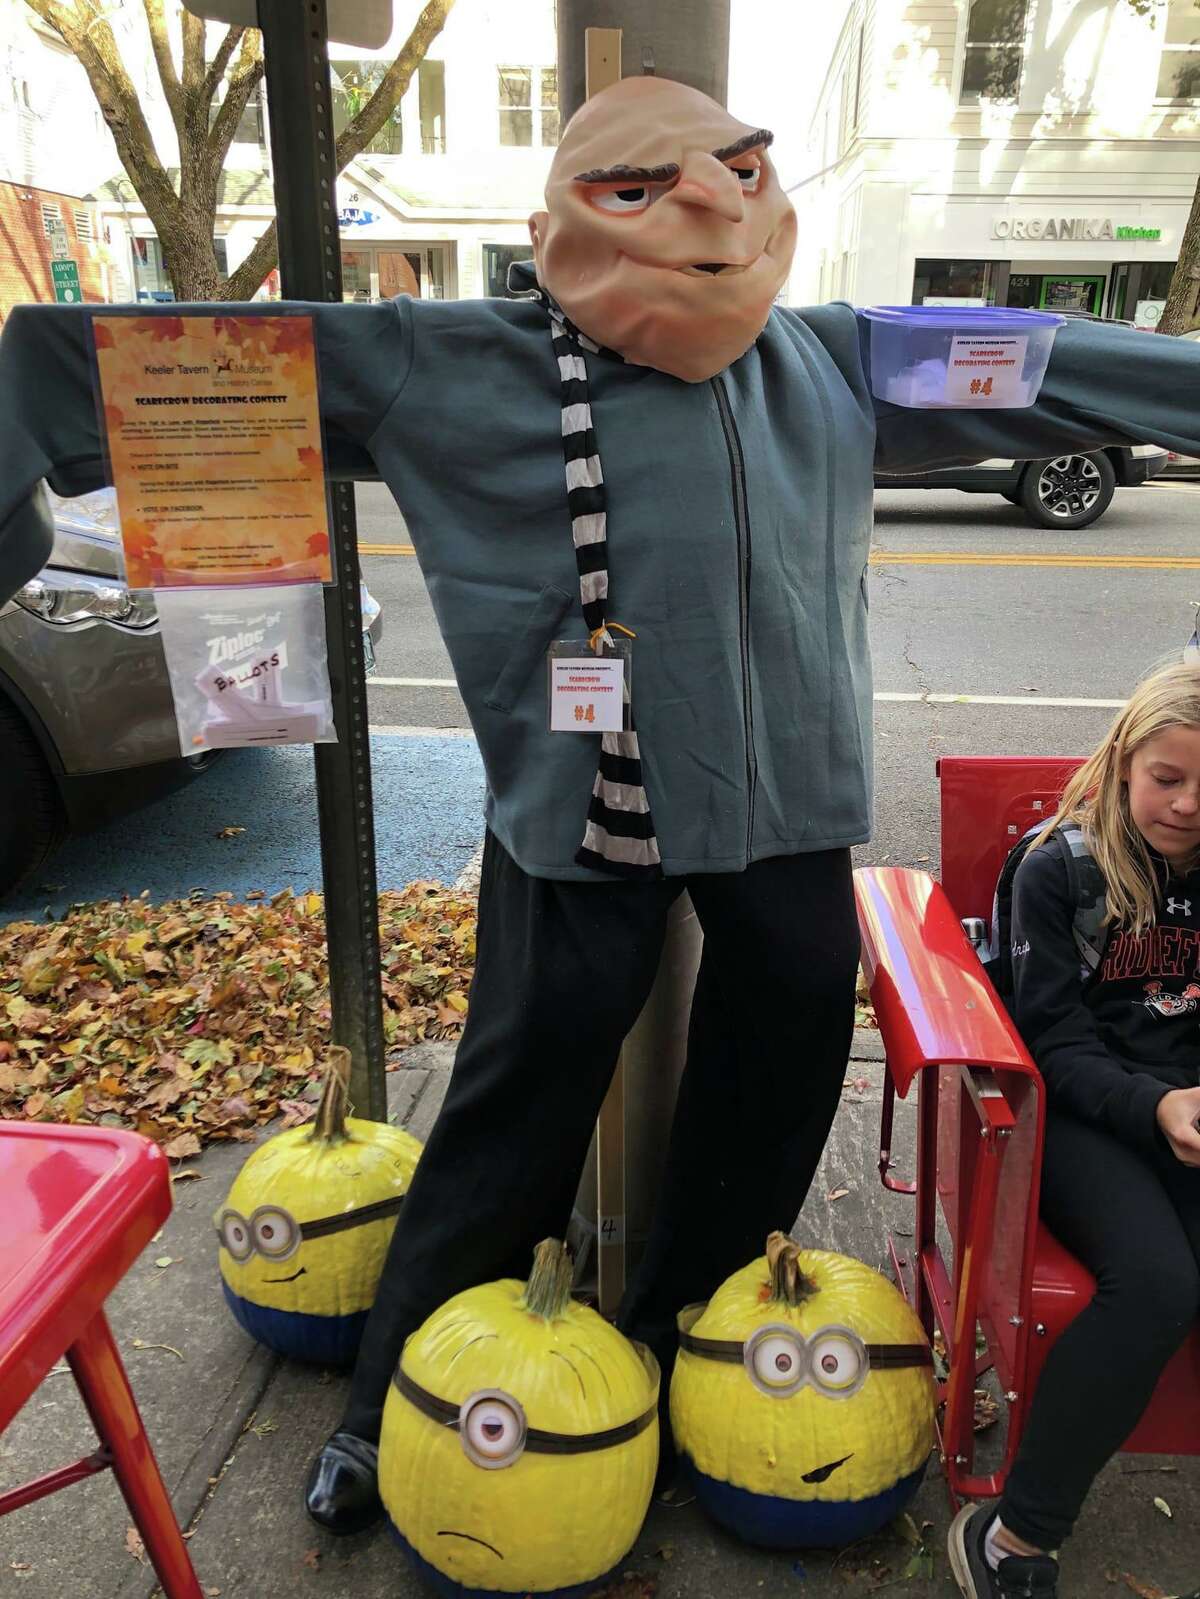 Gru and His Minions, by The Coury and Conroy families won the Main Street ballot vote in Keeler Tavern Museum & History Center’s (KTM&C) 7th annual Scarecrow Contest, held during Fall in Love with Ridgefield weekend, Oct. 18-20, 2019.